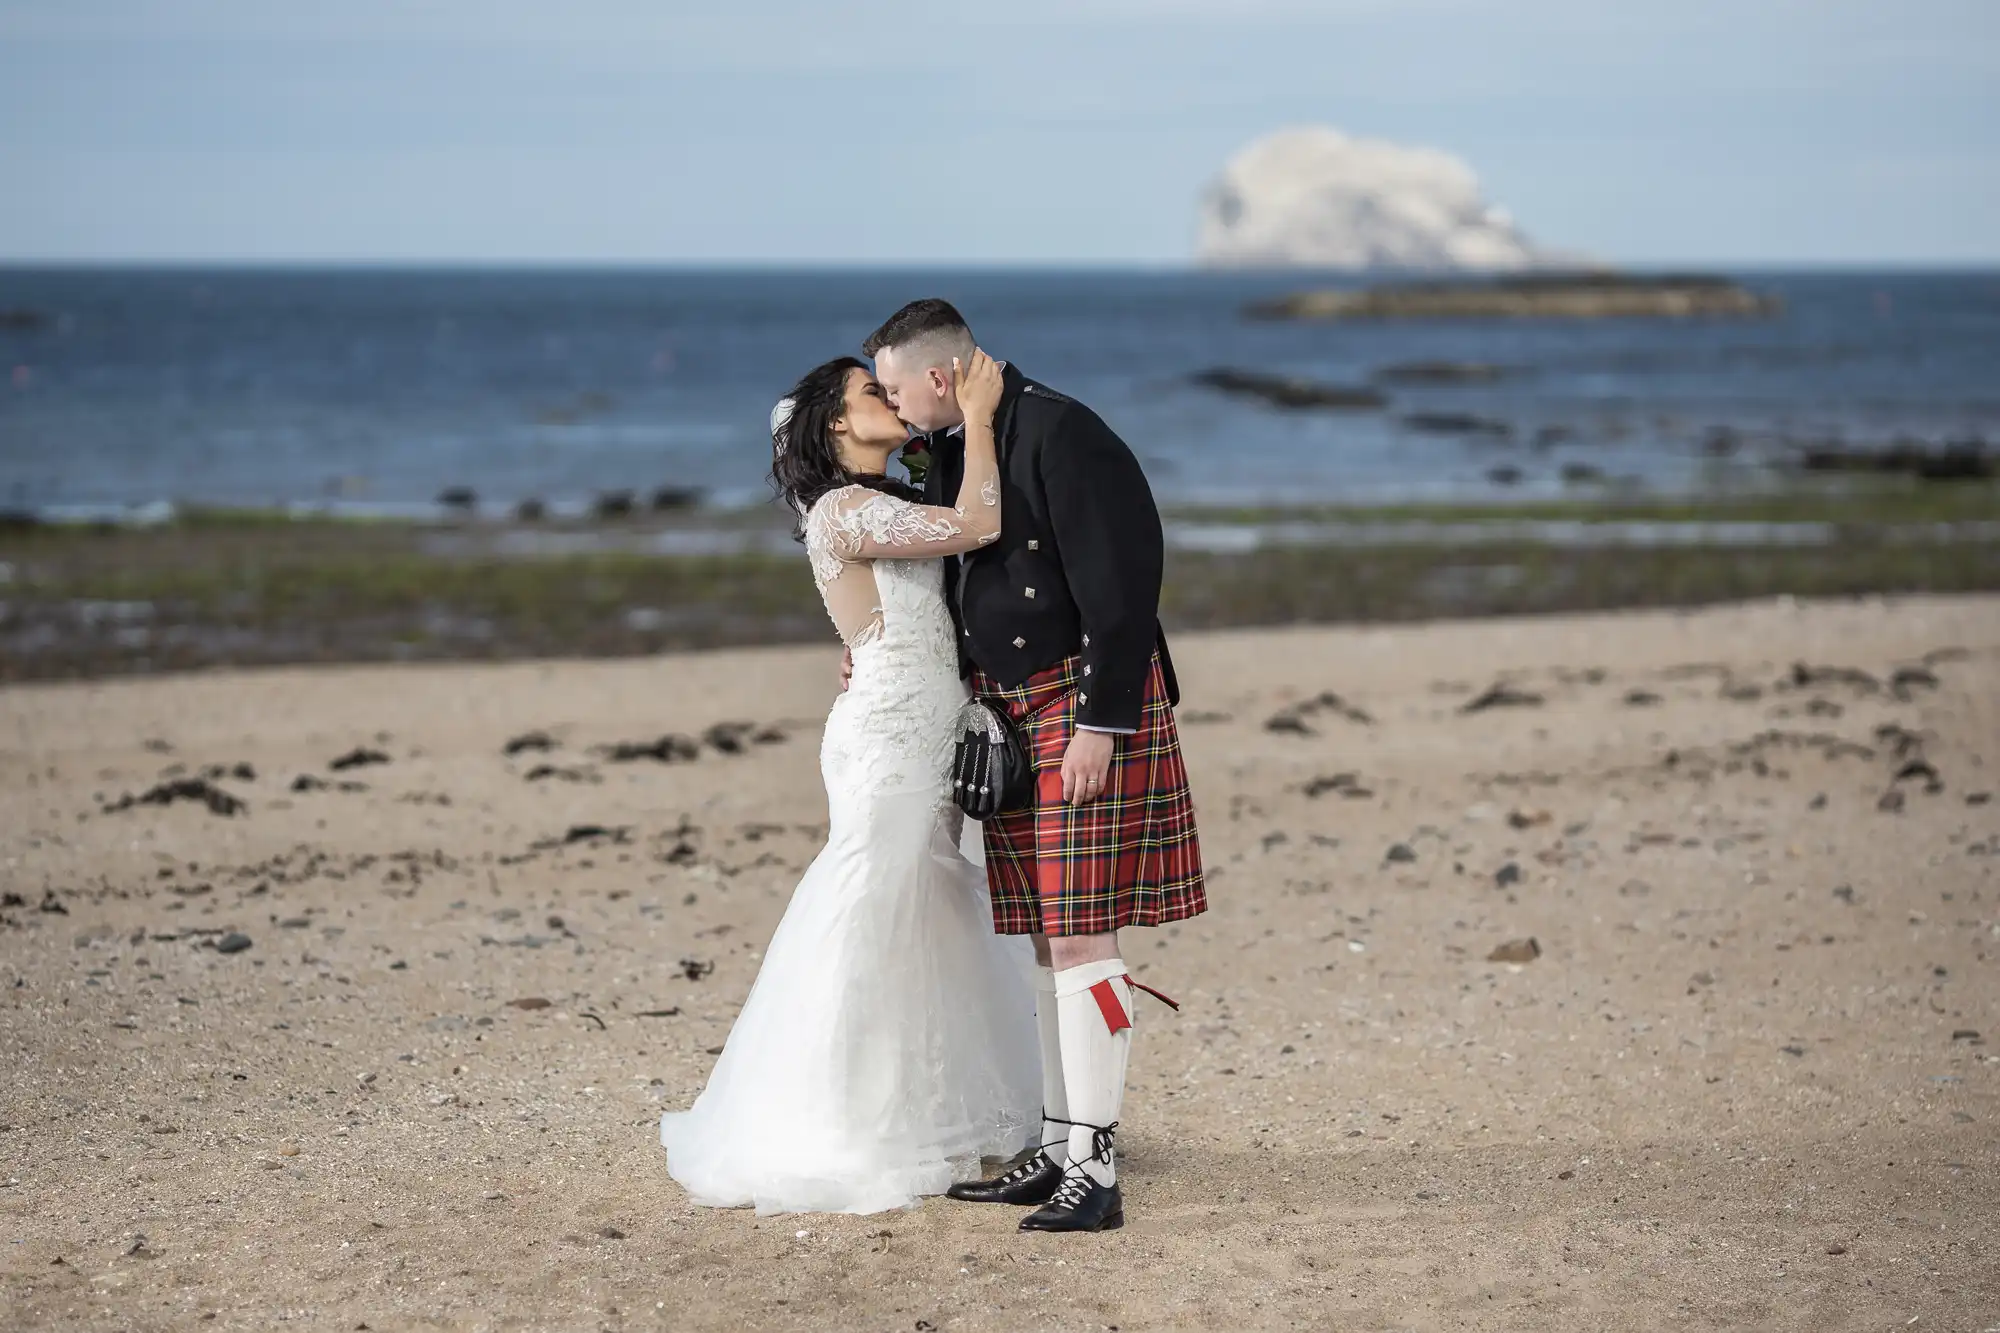 A bride and groom kissing on a beach, with the groom wearing a kilt and the ocean and a rocky island in the background.